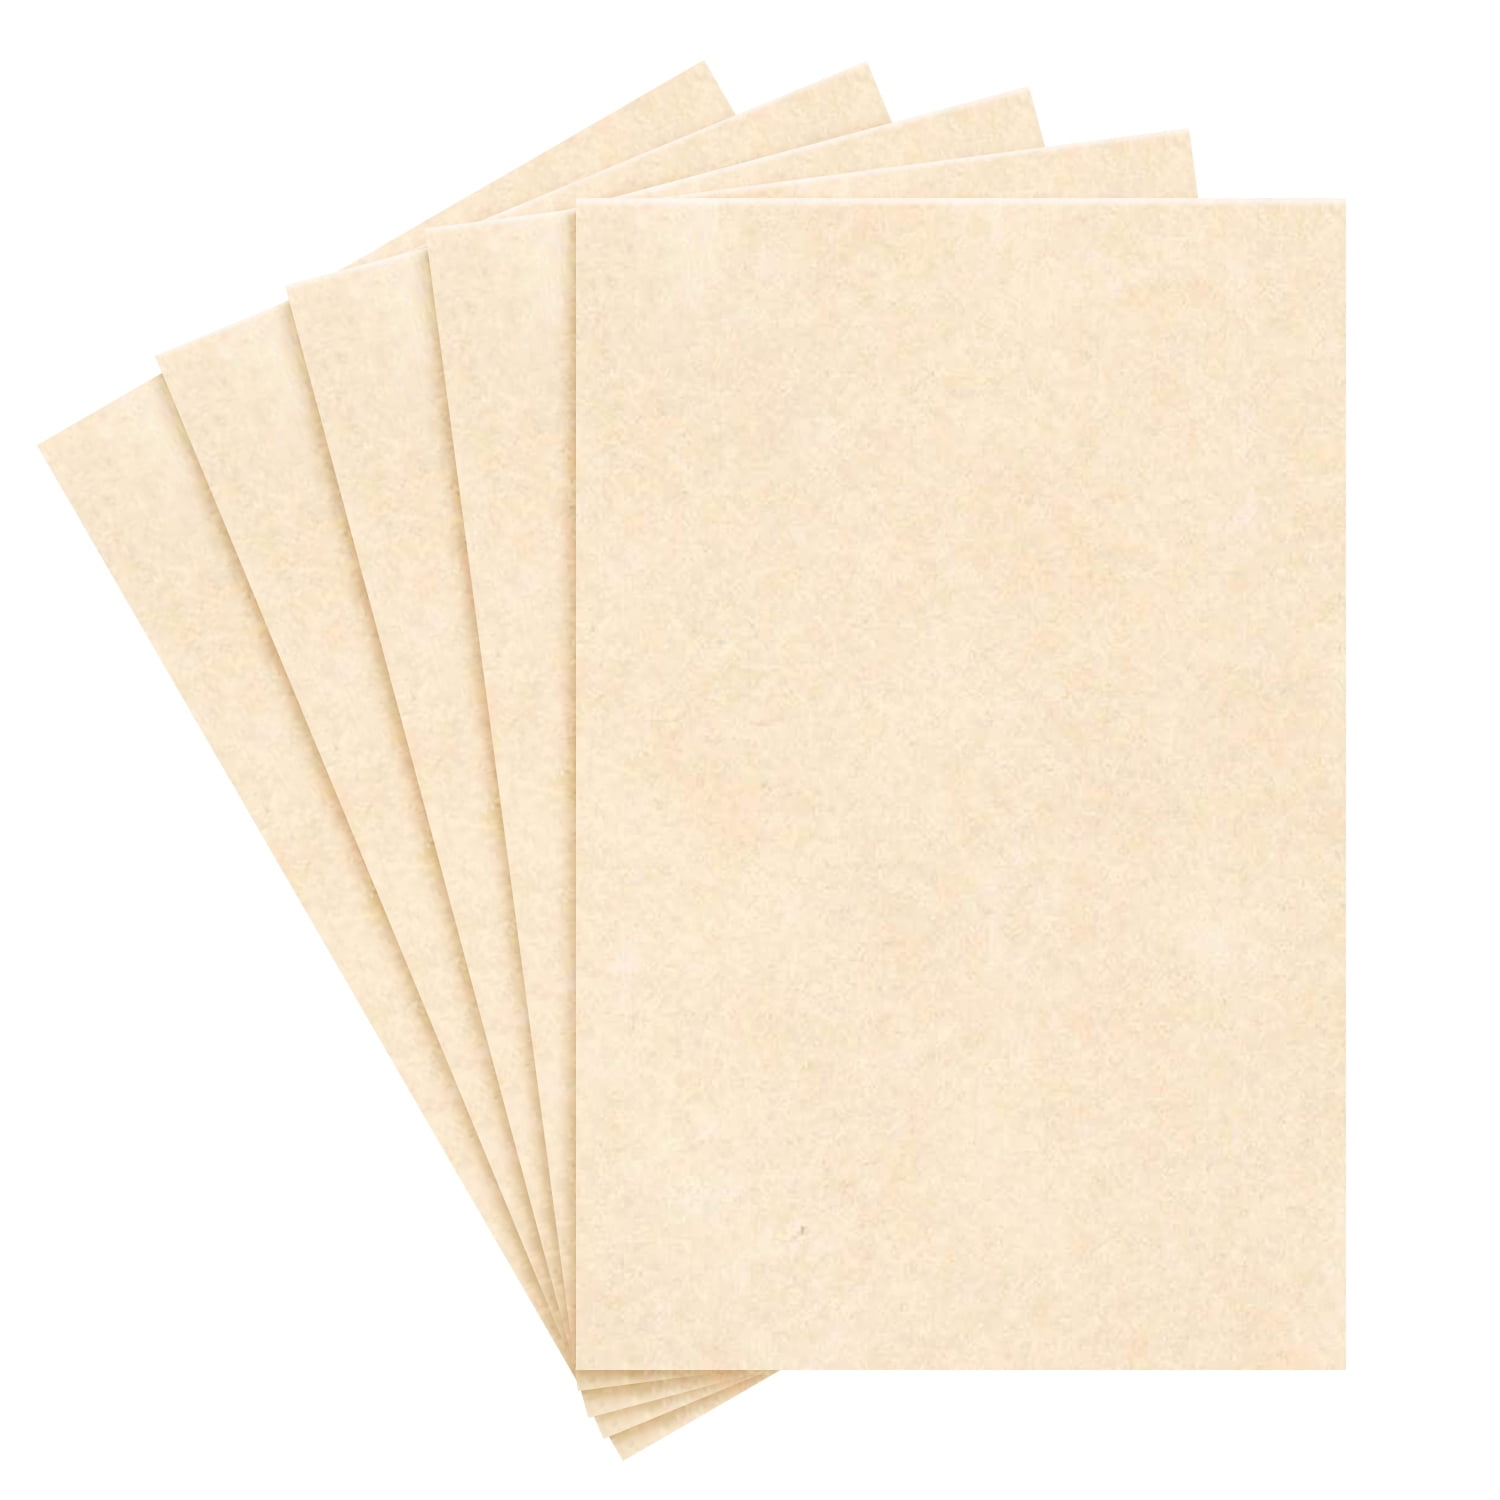 Large Size 'New White' Stationery Parchment Paper – Great for Posters,  Bulletins, Certificates, Menus and Invitations, 24lb Bond, 60lb Text, 90  GSM, 23 x 35 Inches